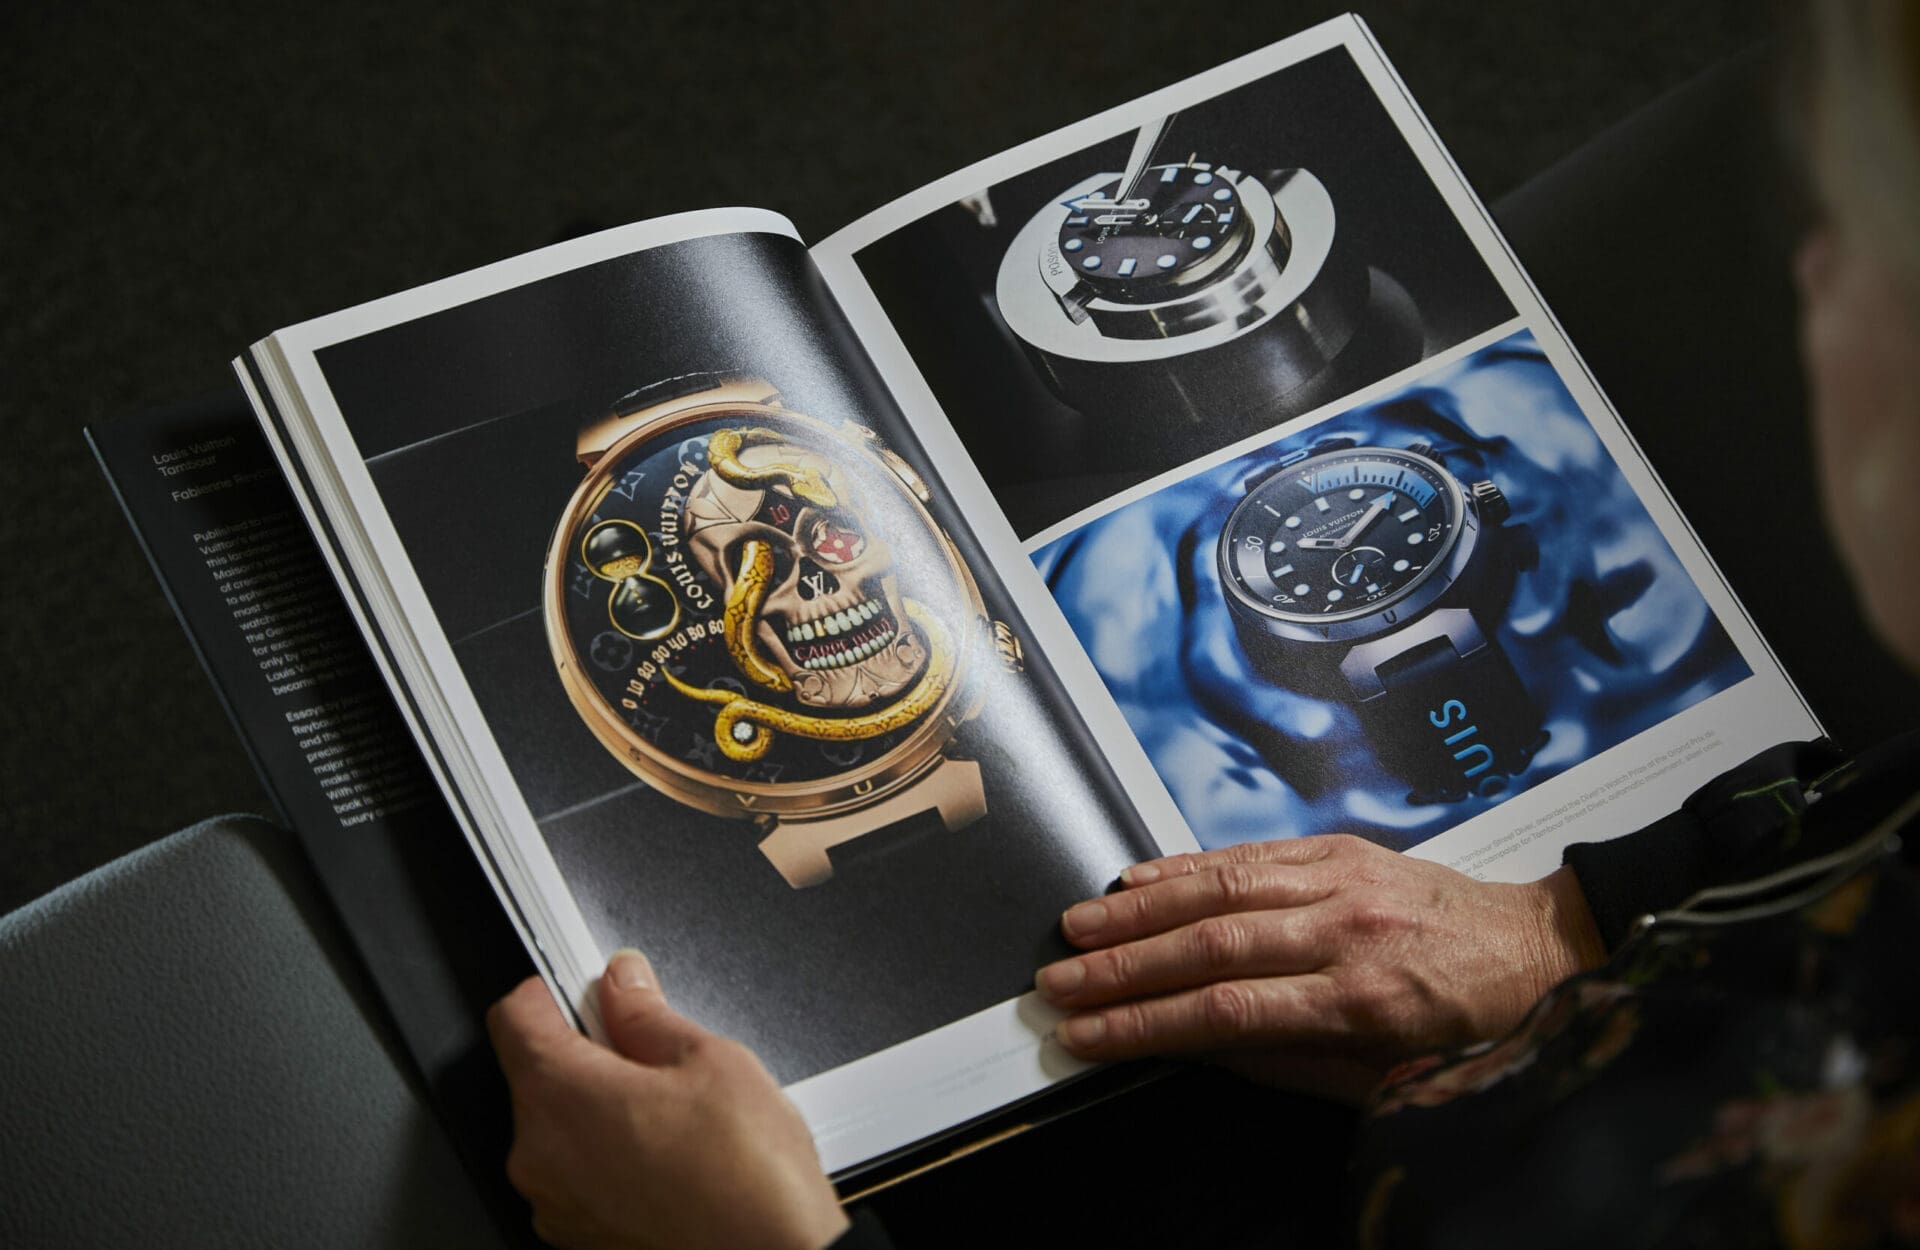 The Louis Vuitton Tambour book is like an in-depth biography of the brand’s favourite model